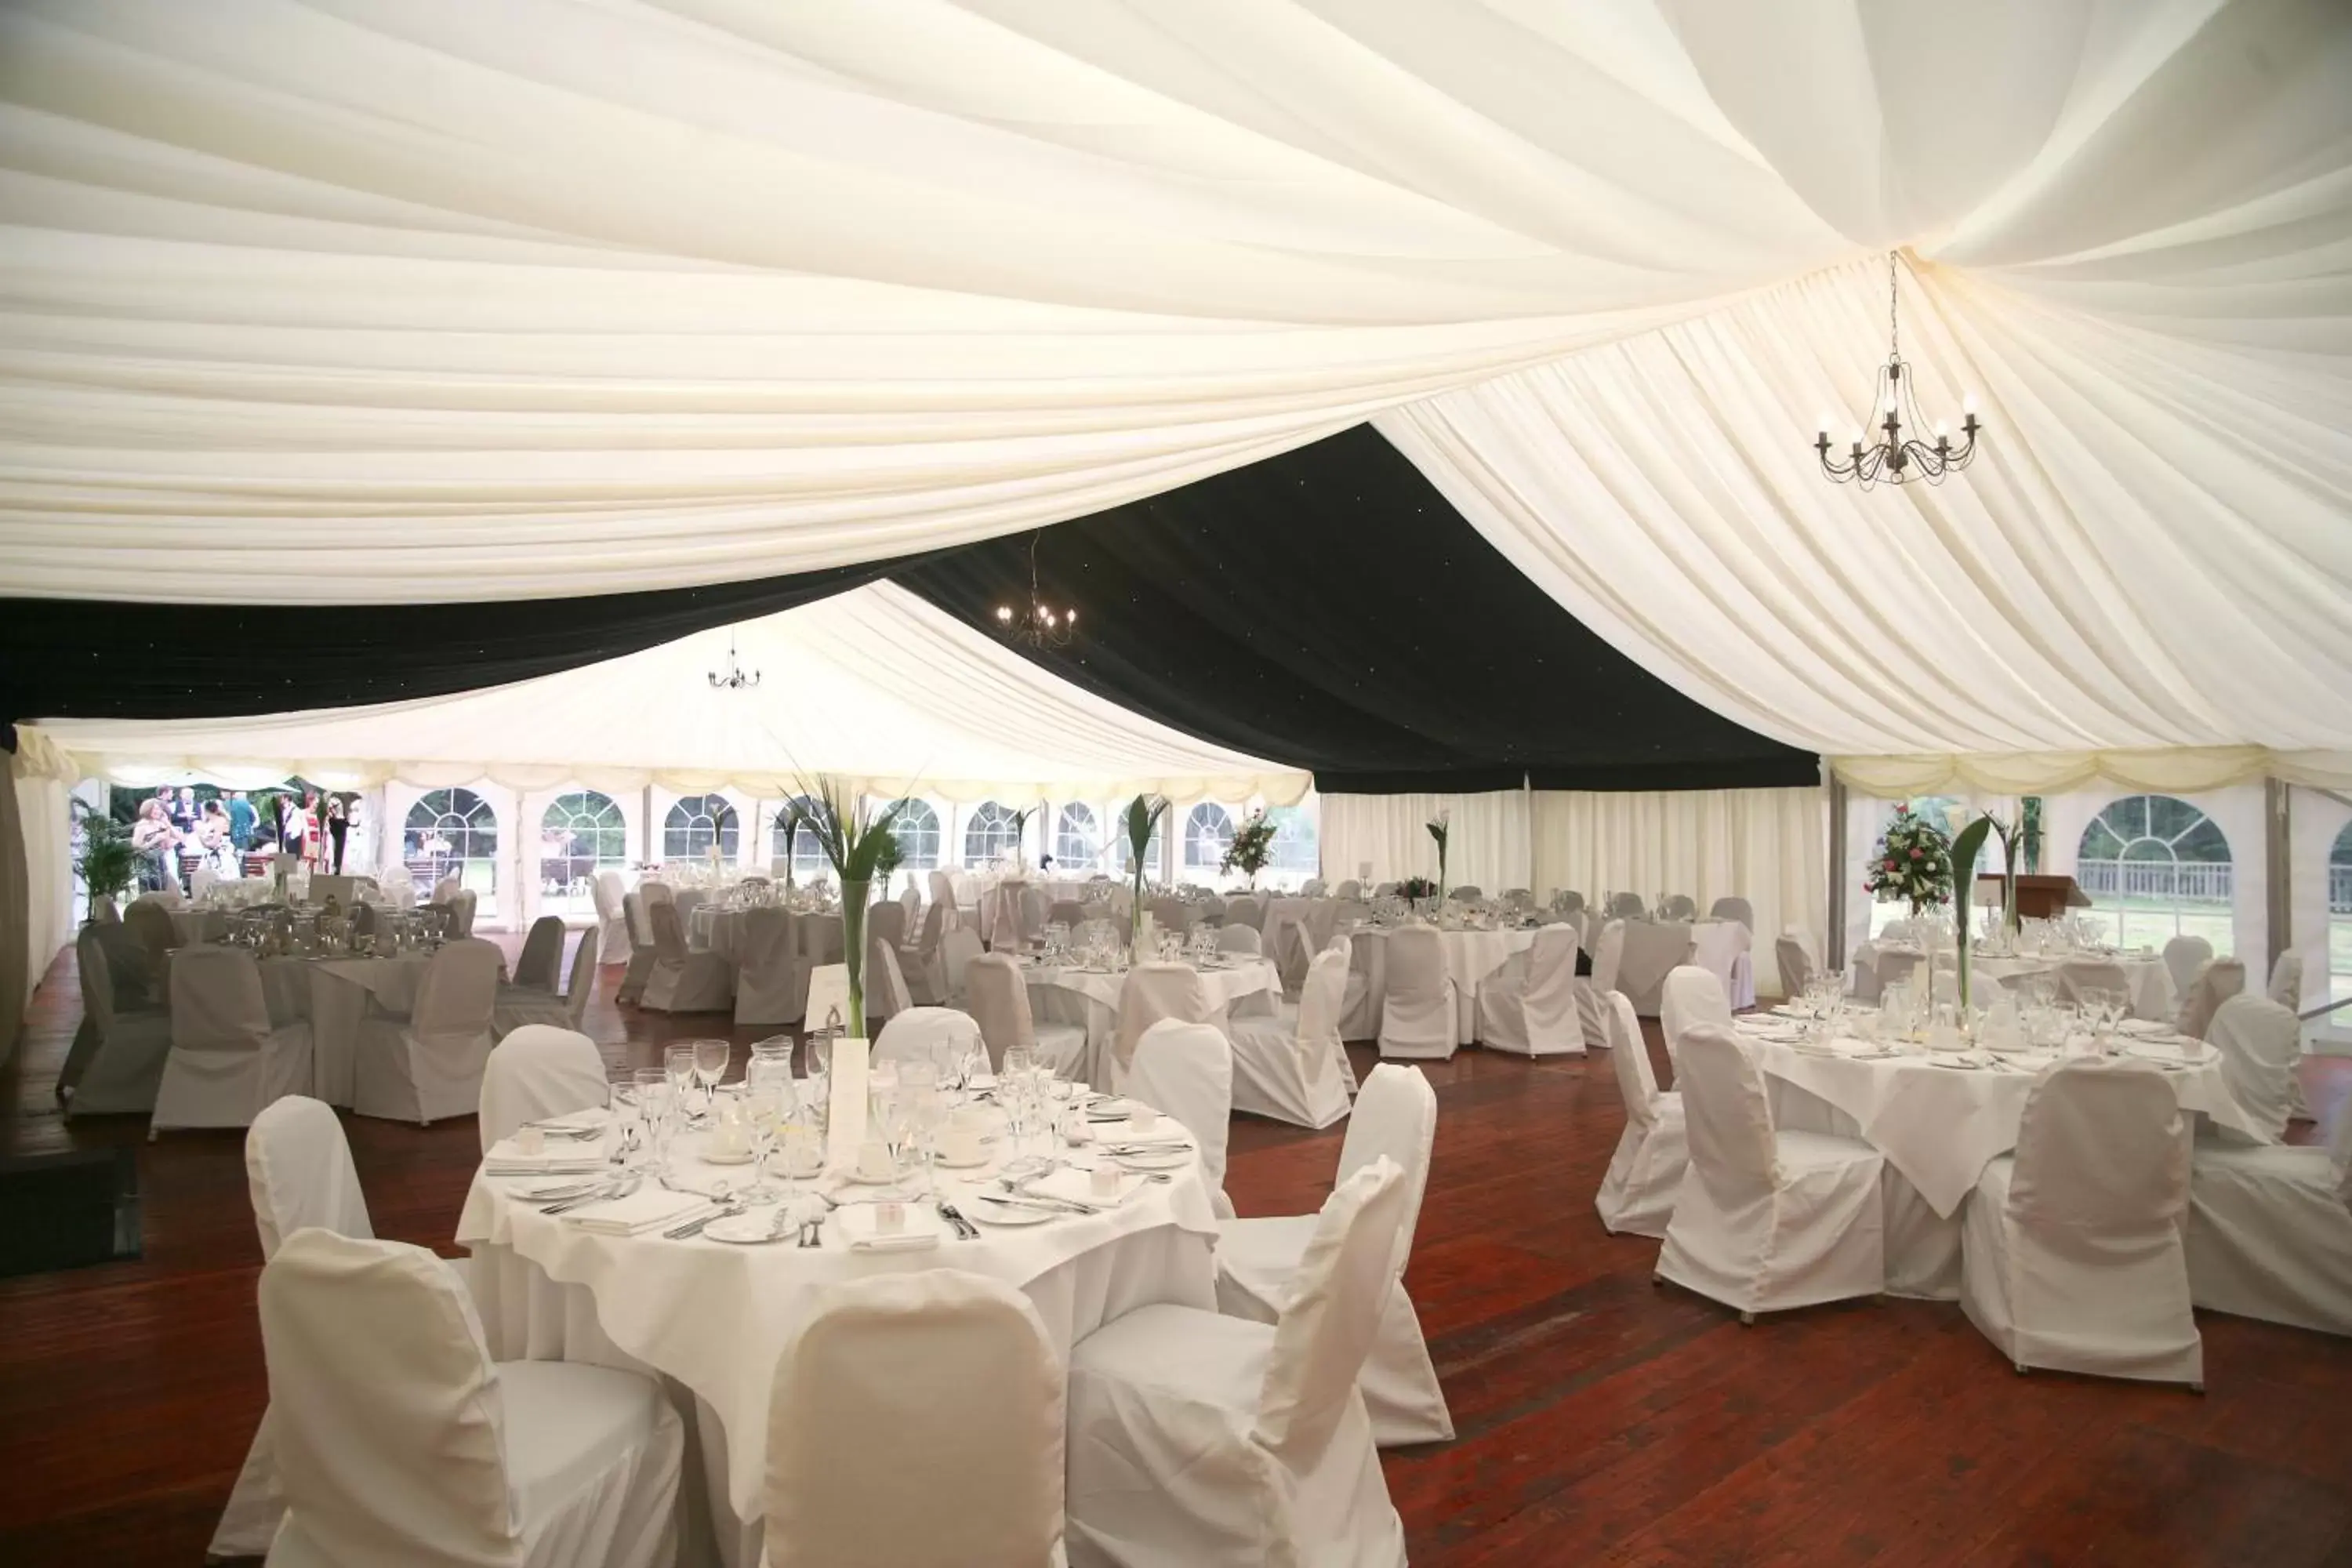 Banquet/Function facilities, Banquet Facilities in Dryburgh Abbey Hotel